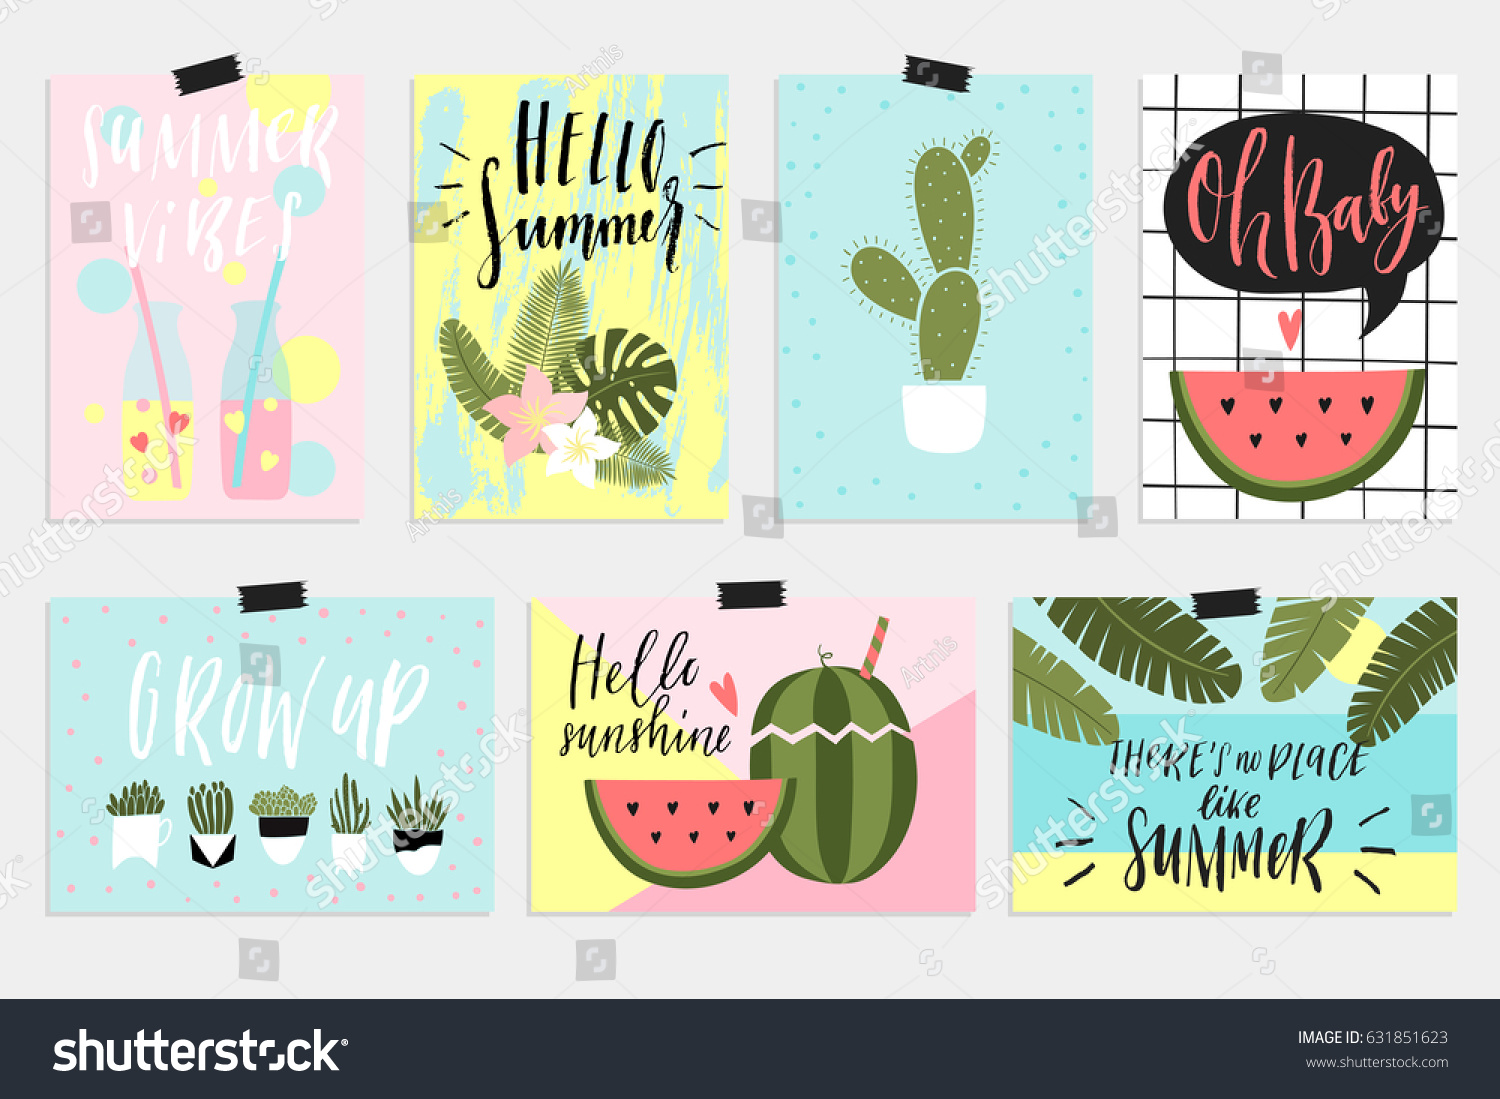 Summer Greeting Cards Posters Fun Elements Stock Vector Royalty Free 631851623